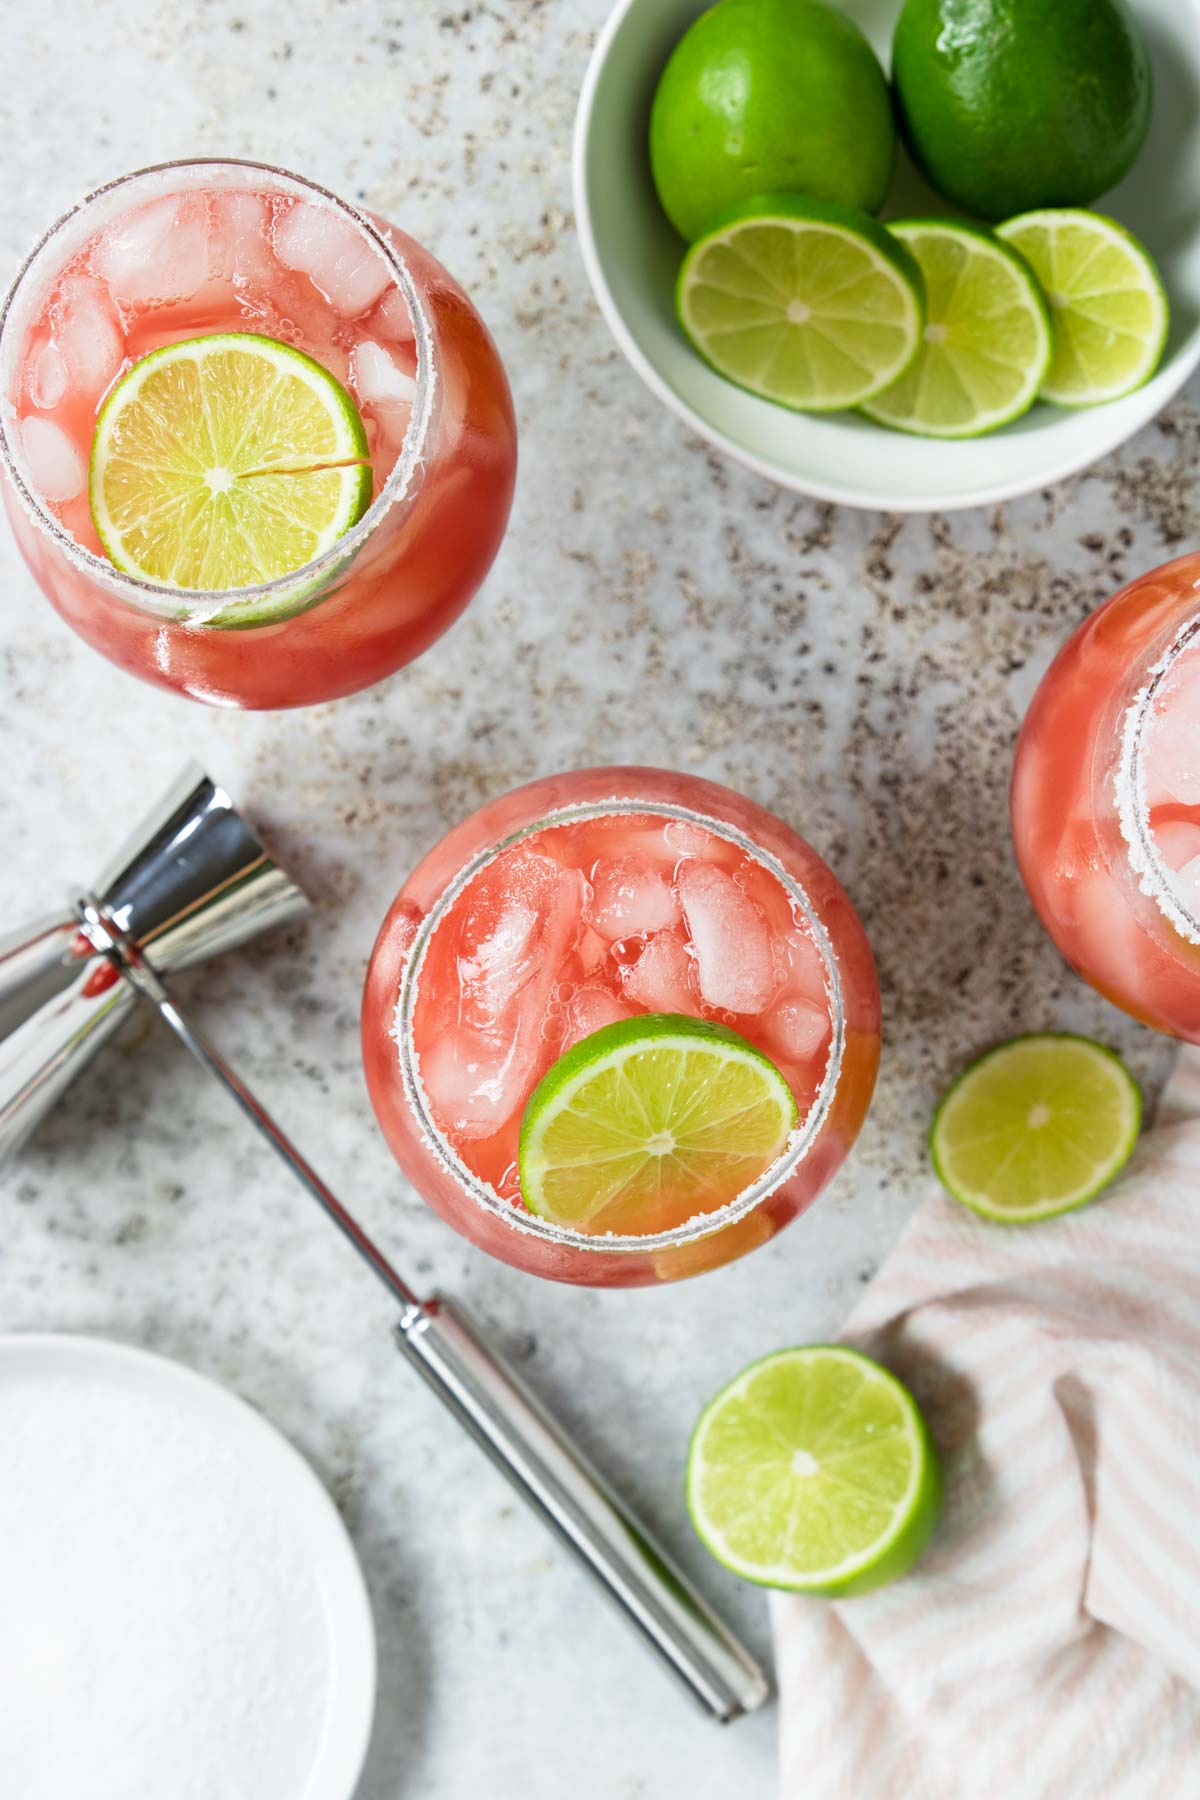 watermelon margaritas photographed from above showing the drink in the glass and a bowl of limes